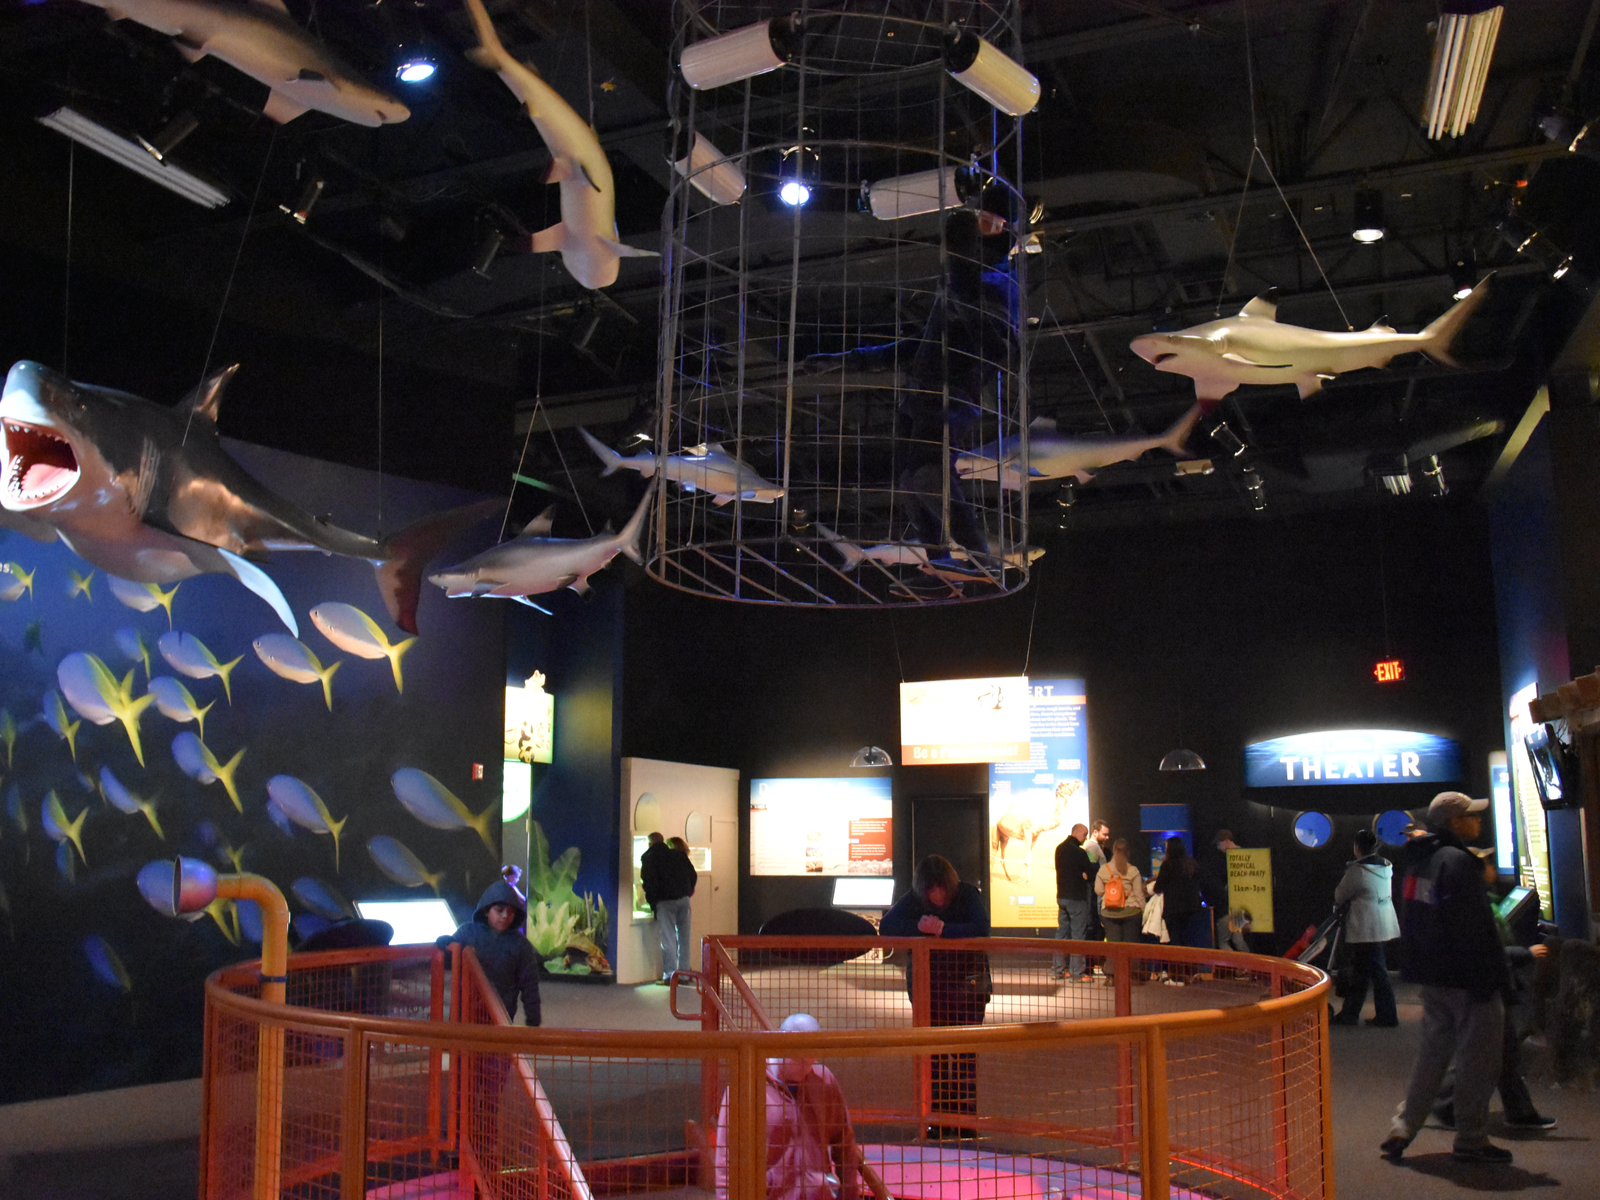 Interior of the Mystic Aquarium in Connecticut, titled one of the best aquariums in the US, with a few visitors peeking at the small aquarium viewing area and multiple shark figures hanging by the ceiling